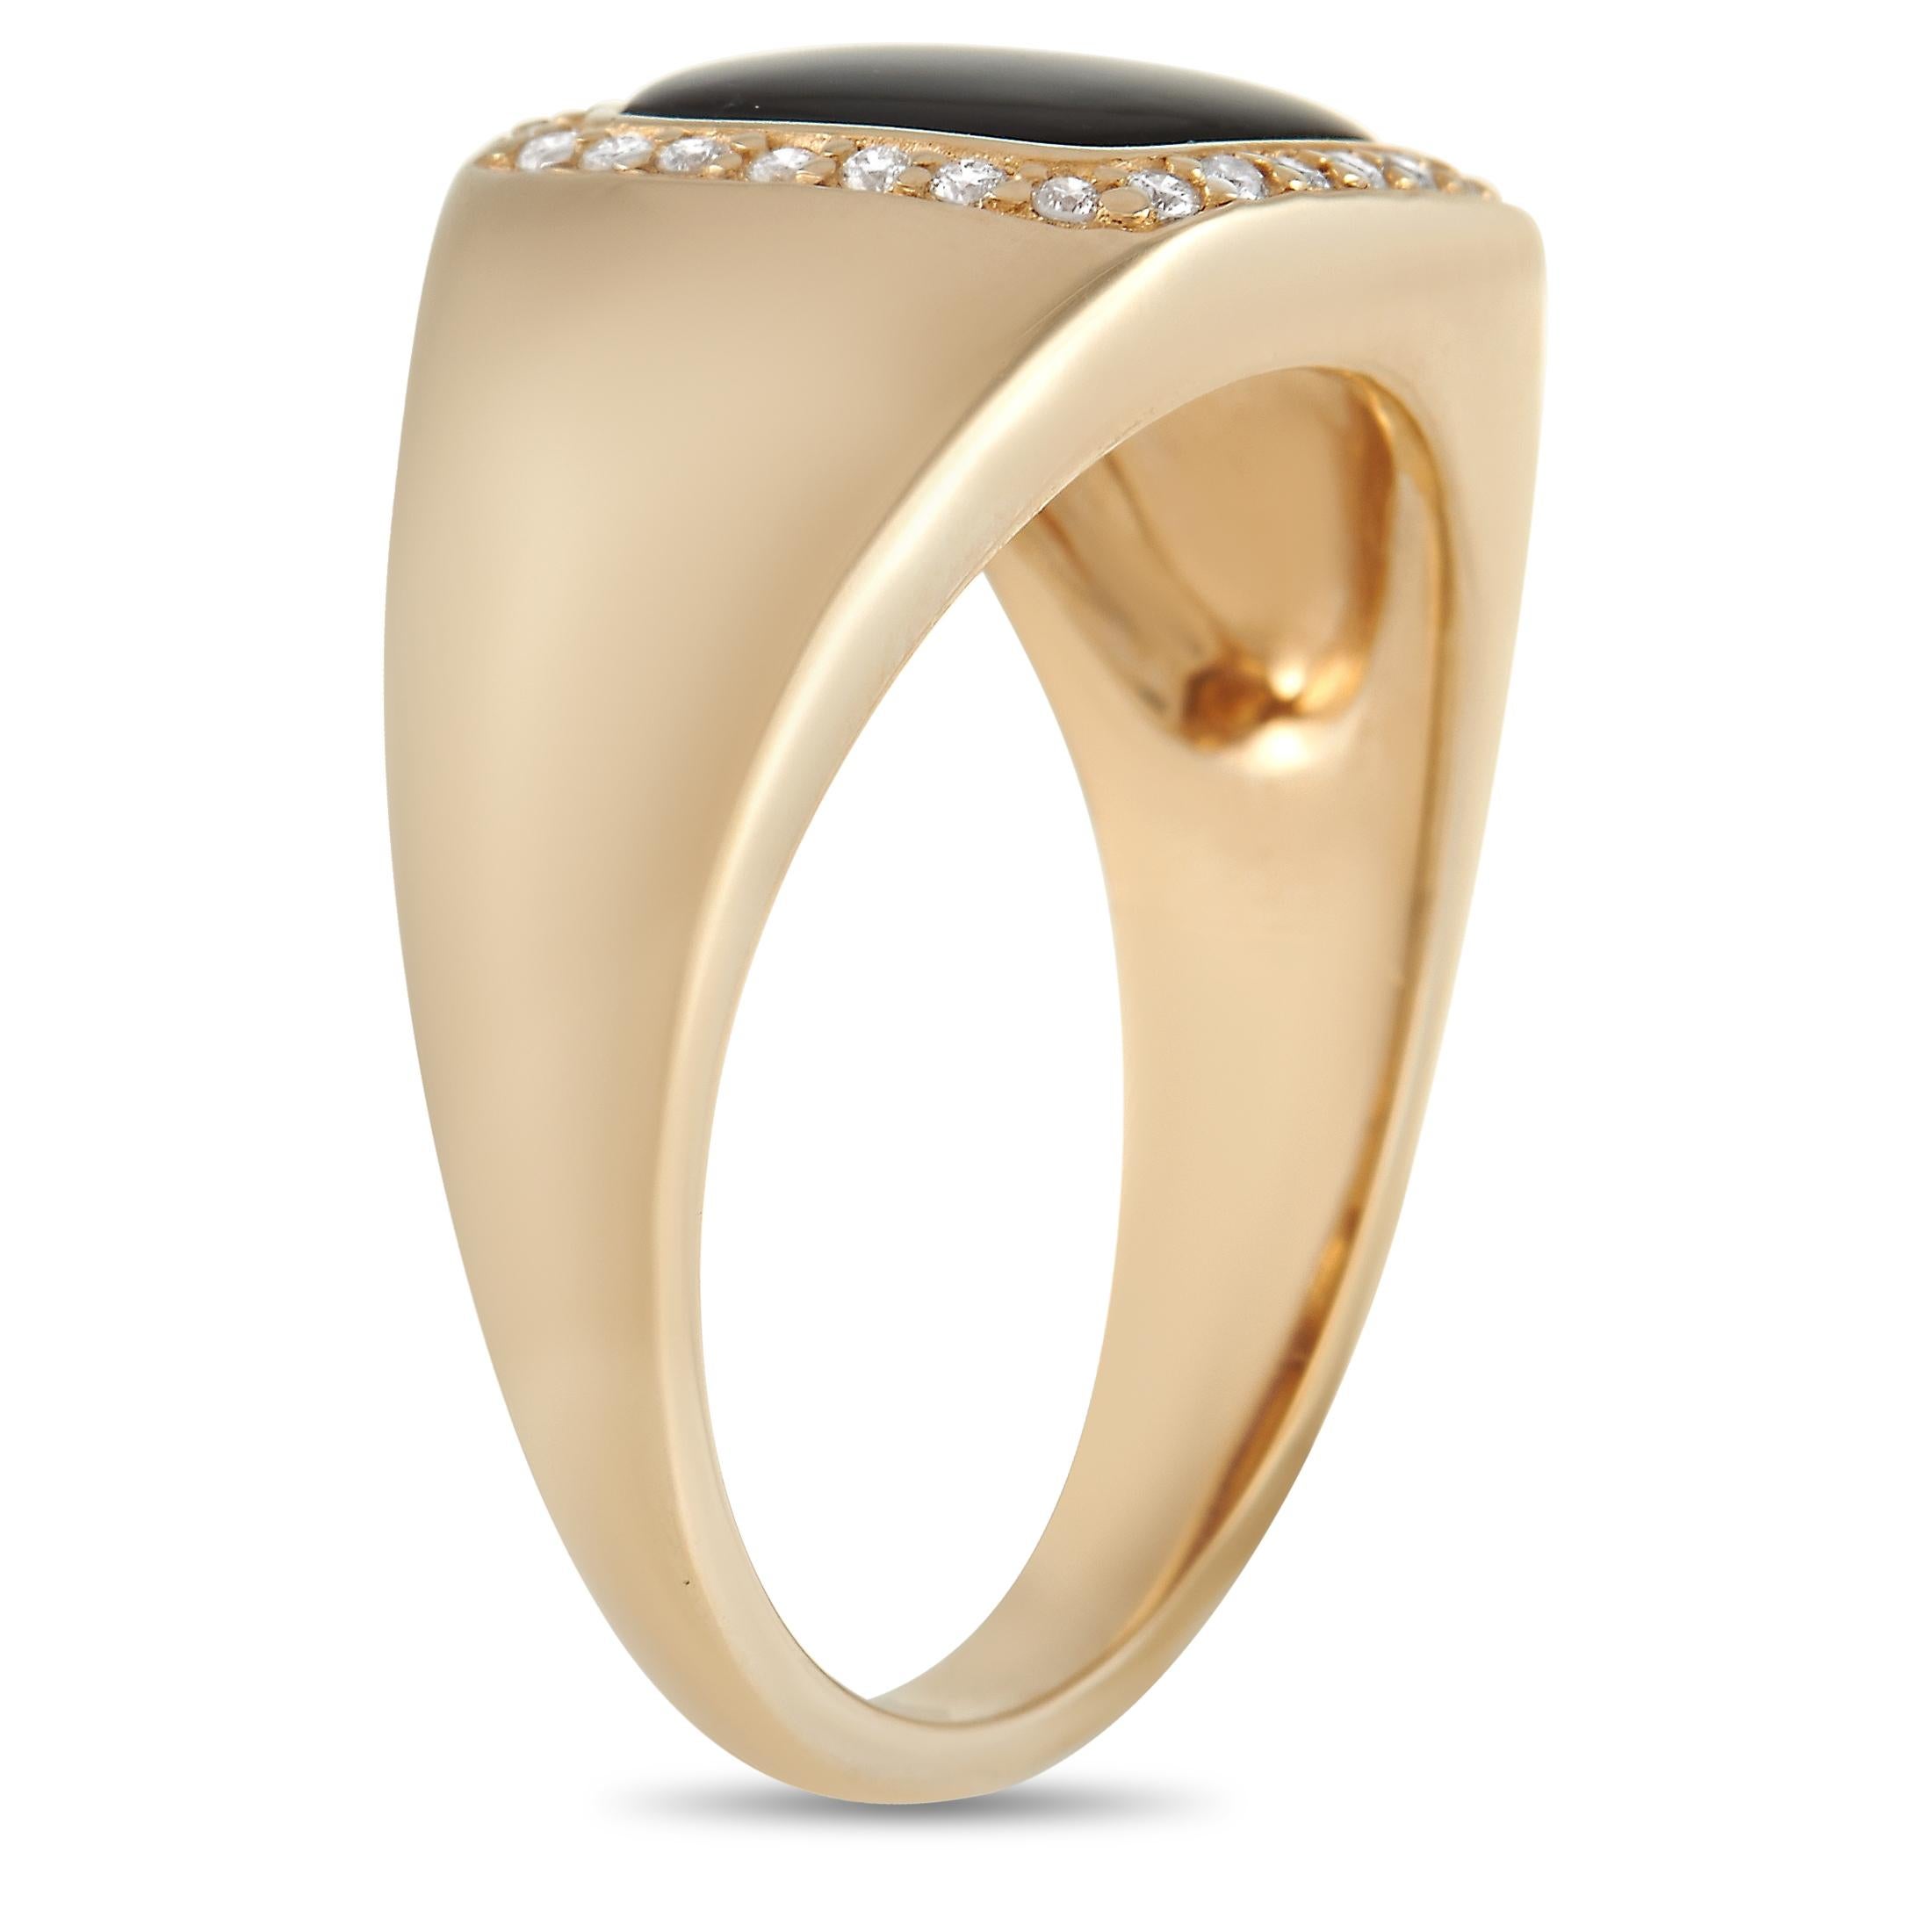 Simple, striking, and elegant, this Kabana ring is a piece you’ll find yourself wearing again and again. At the center of the bold 14K Yellow Gold setting - which features a 4mm wide band and a 3mm top height - you’ll find a captivating dark